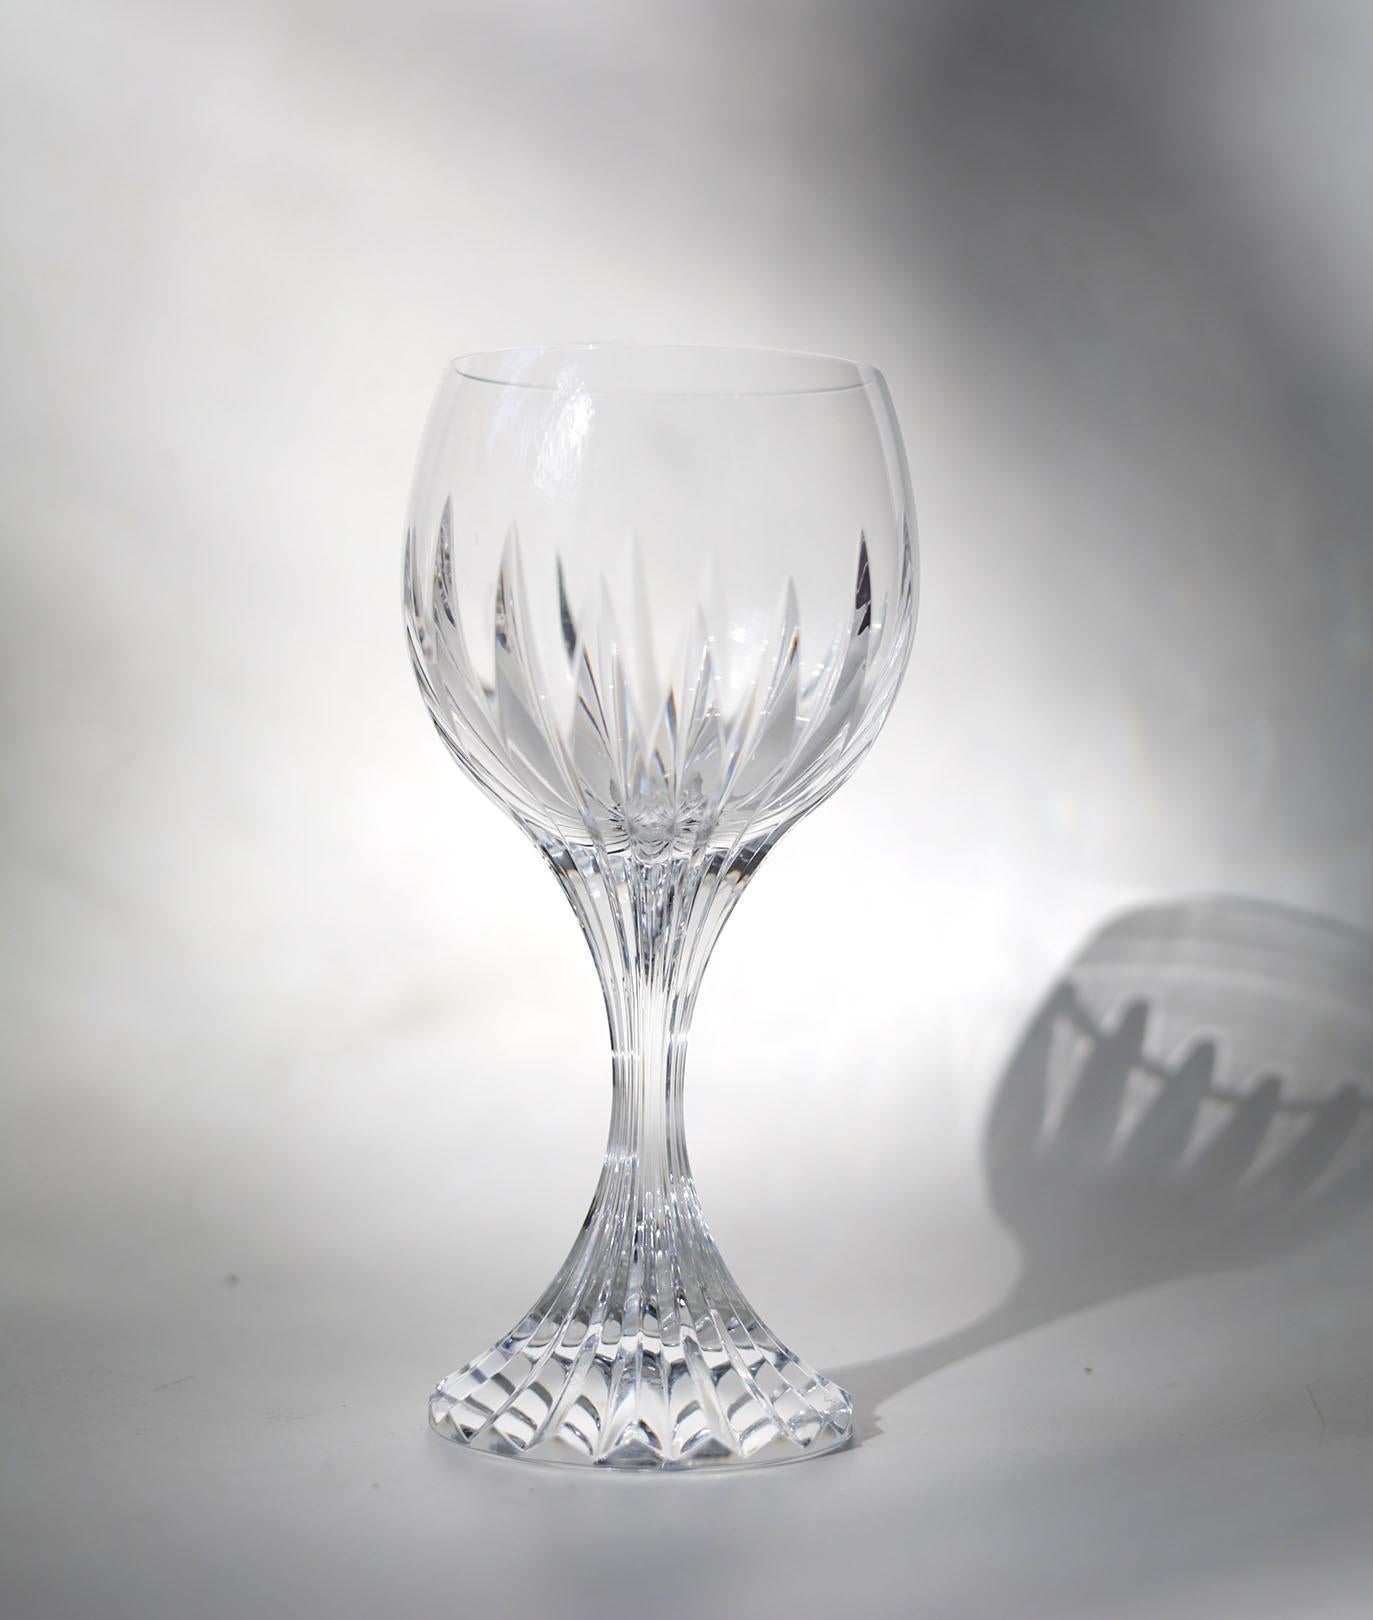 This, in turn, puts the smoothness of the upper bowl in sharp relief. The intricate detailing gives the Massena glass the appearance of impressive heft, as if it were a modern-day chalice. The polished silhouette and prismatic qualities make it